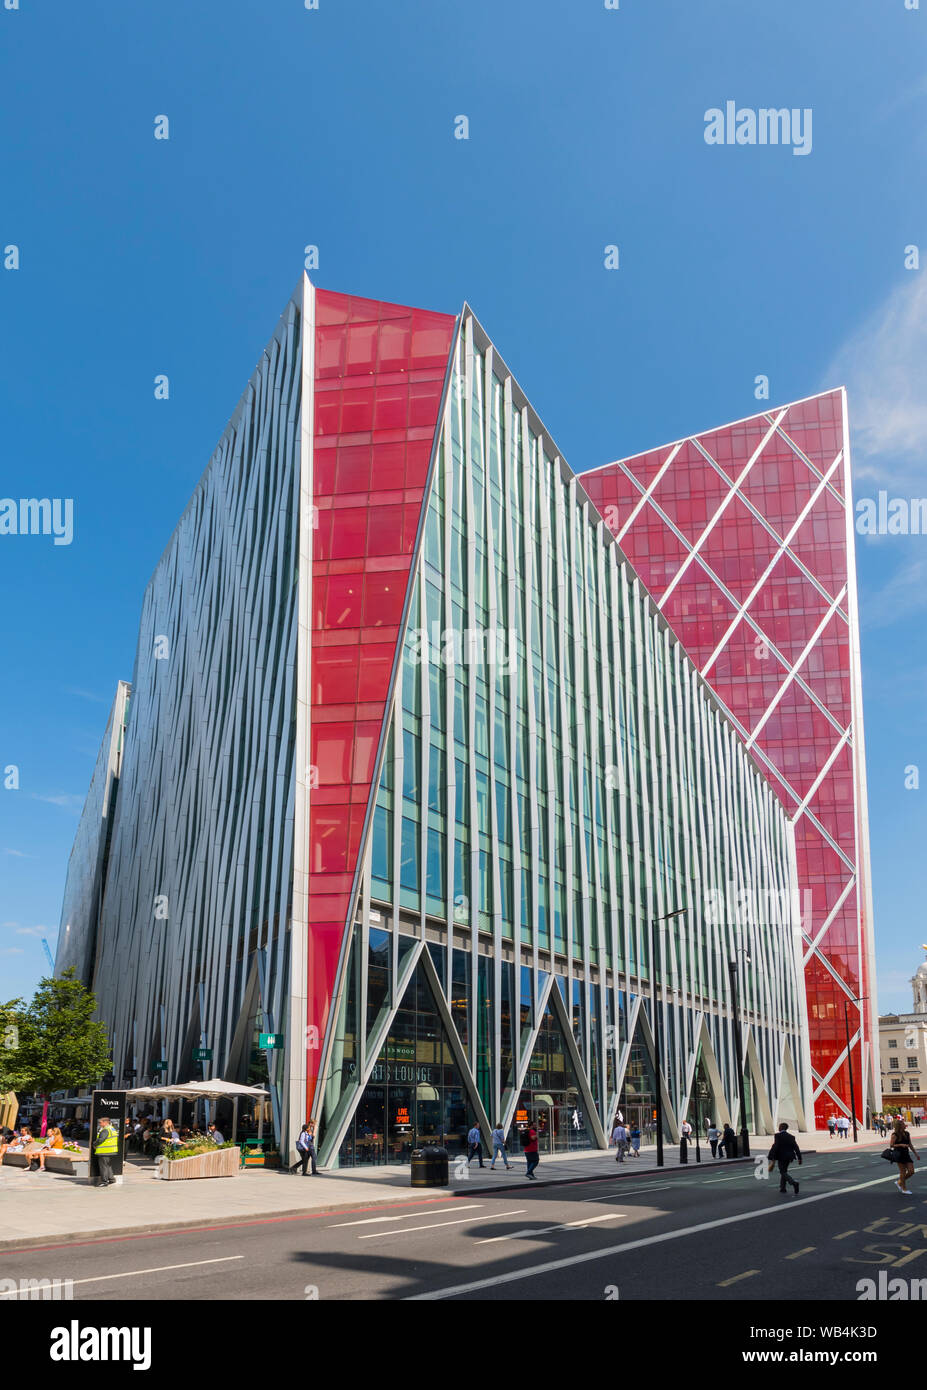 Nova Victoria, a contemporary architecture urban modern office block building in Victoria, City of Westminster, Central London, England, UK. Stock Photo